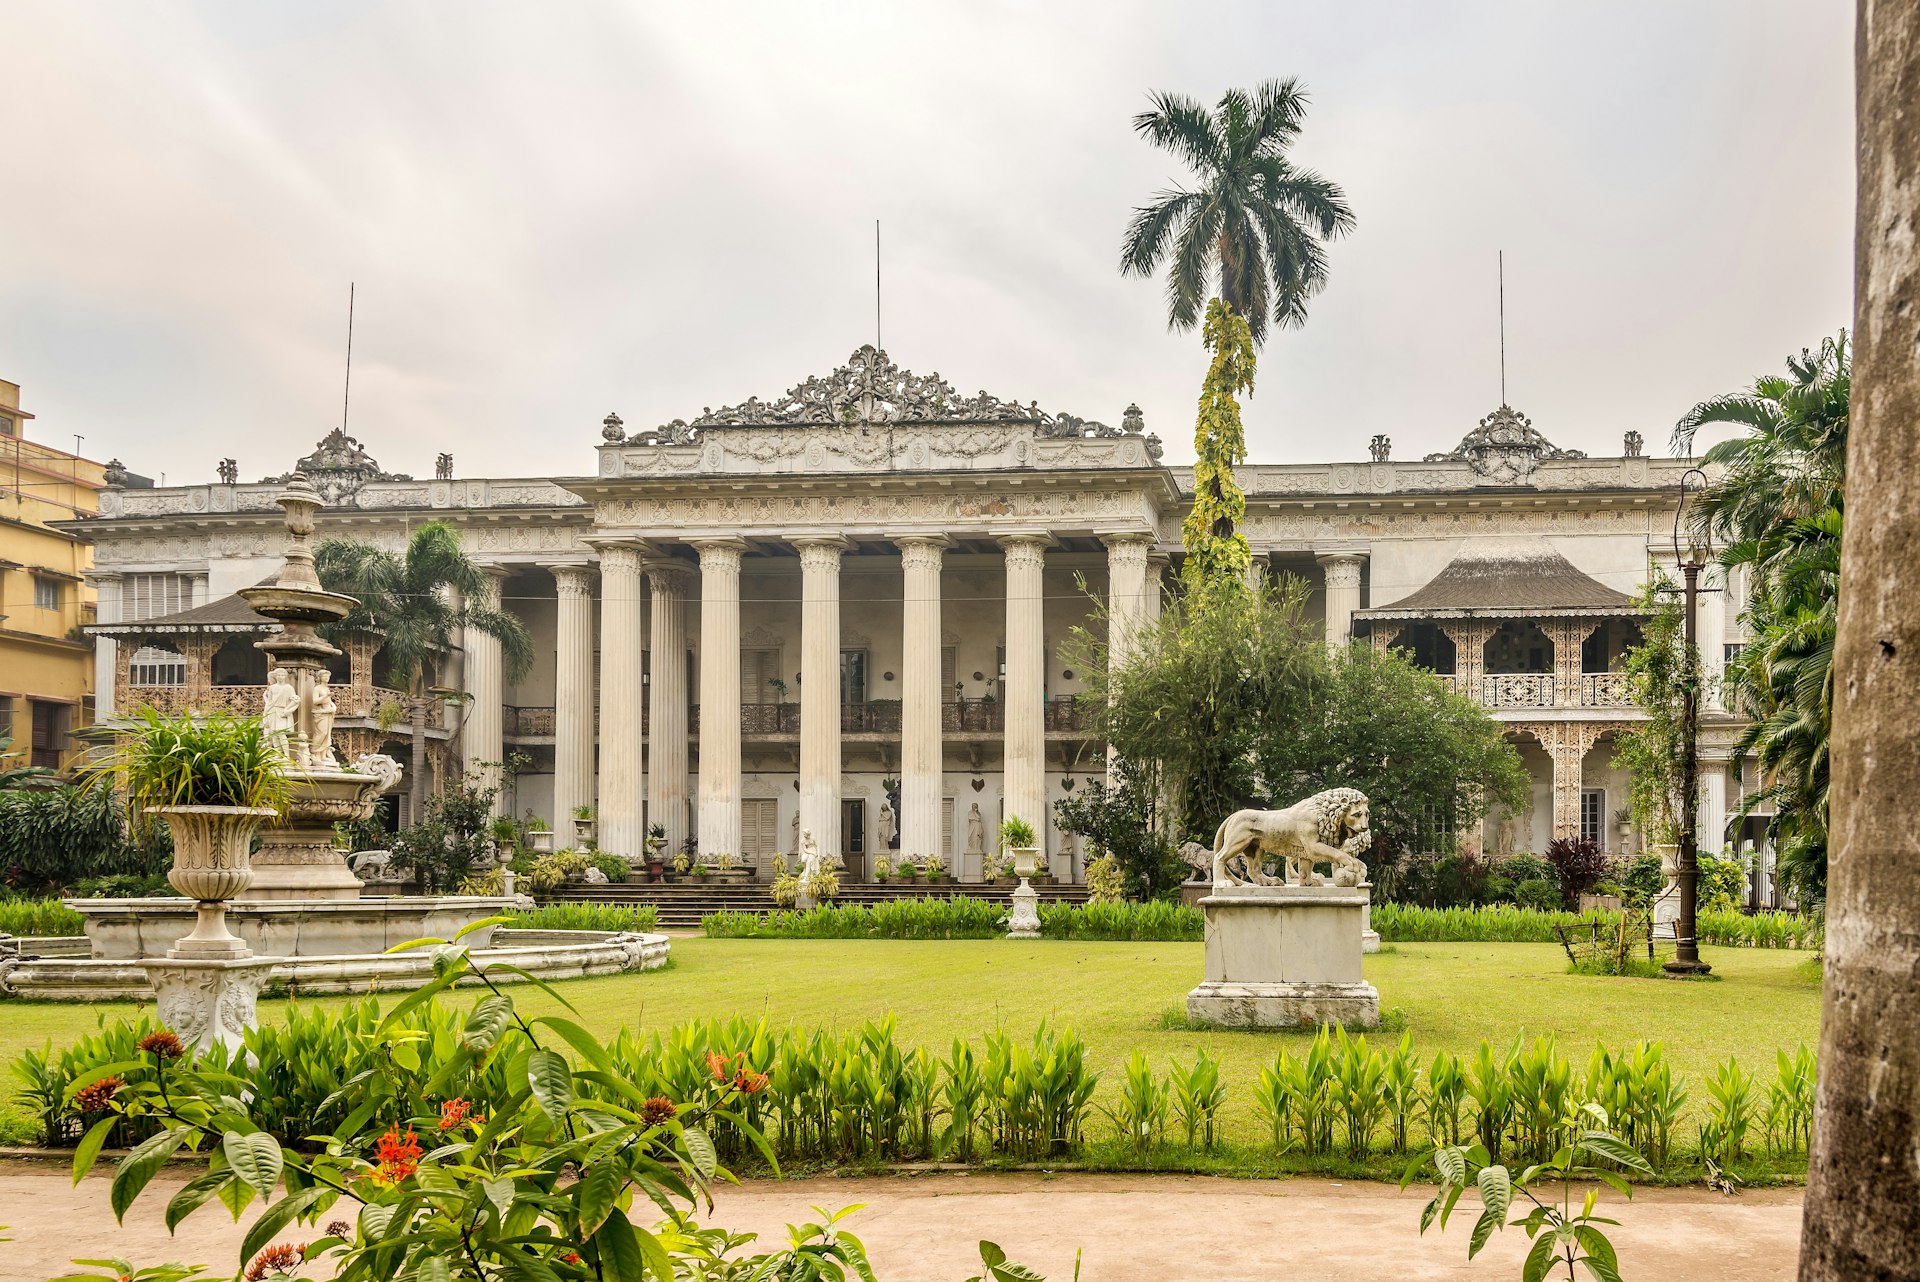 The exterior of Kolkata's Marble Palace as seen from the front. The palace is grand, with white columns and fountains in the green gardens.